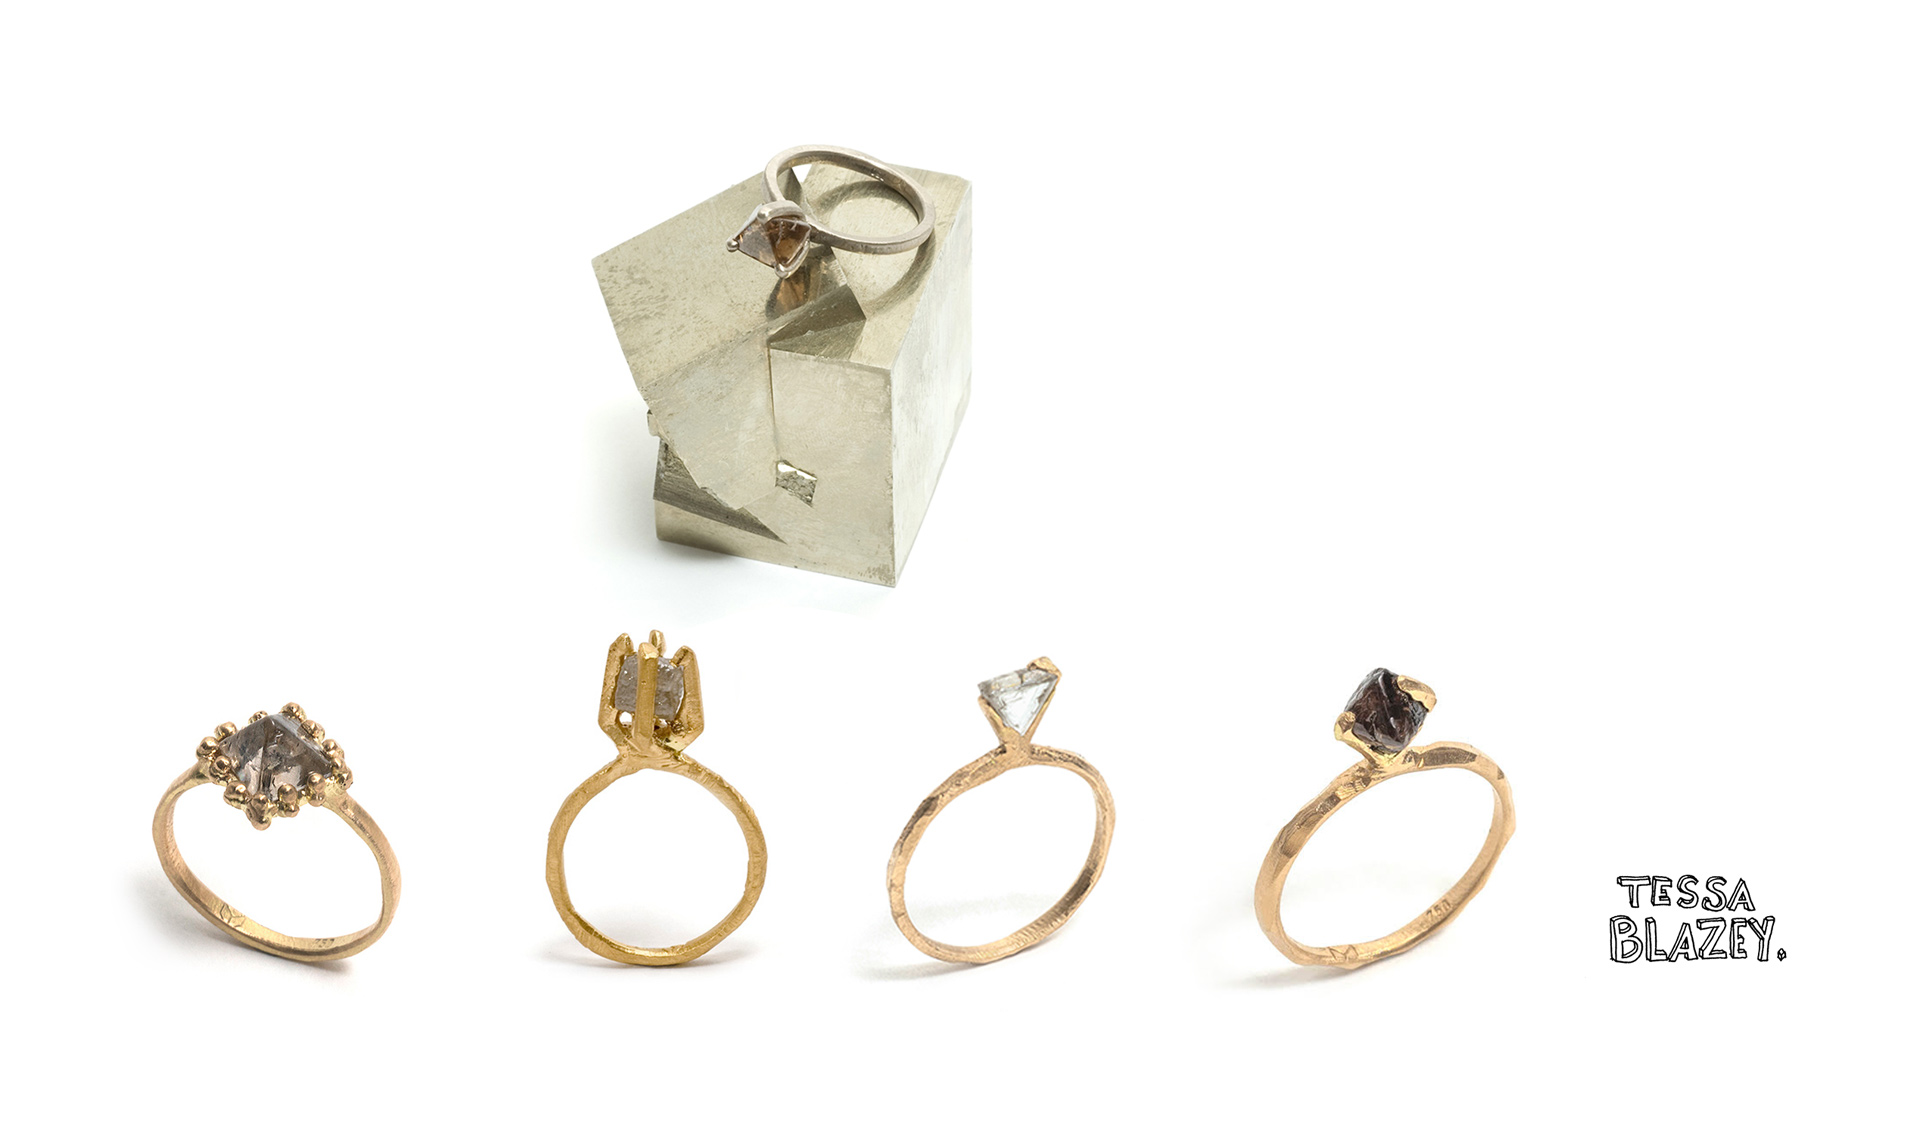 Designer jewellers are reverting back to the tradition of using roughs set direct into jewellery